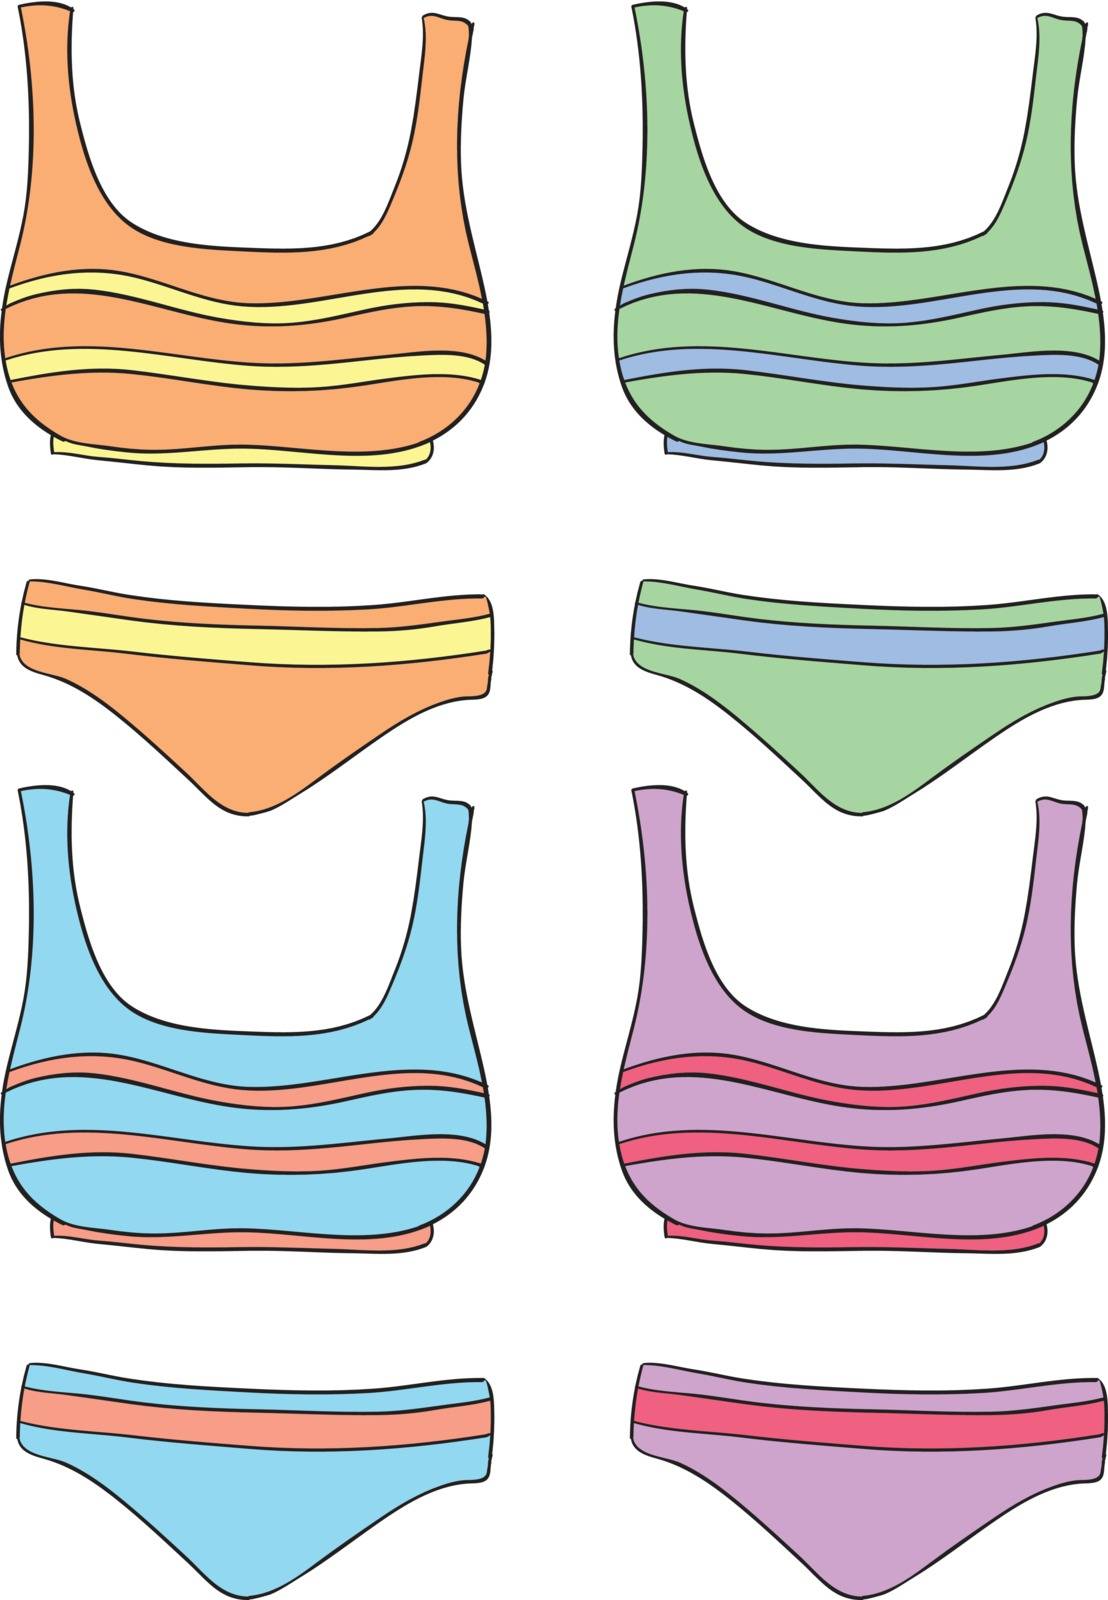 Illustration of clothes in four colors